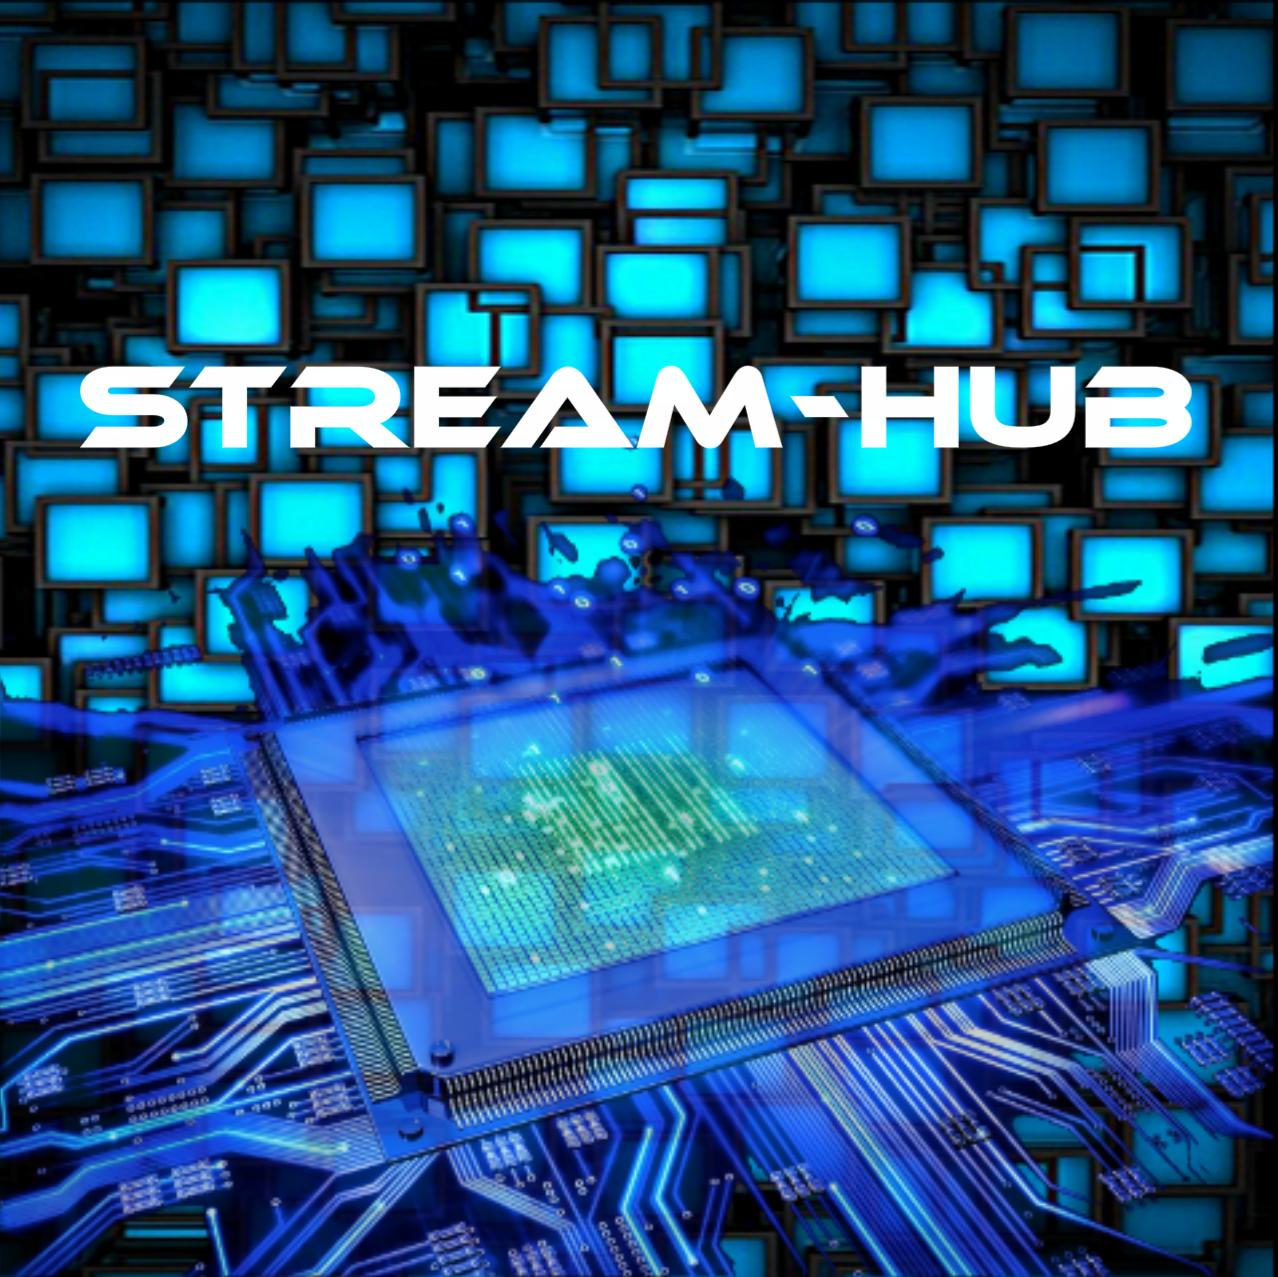 Stream HUB fire TV for Android - APK Download